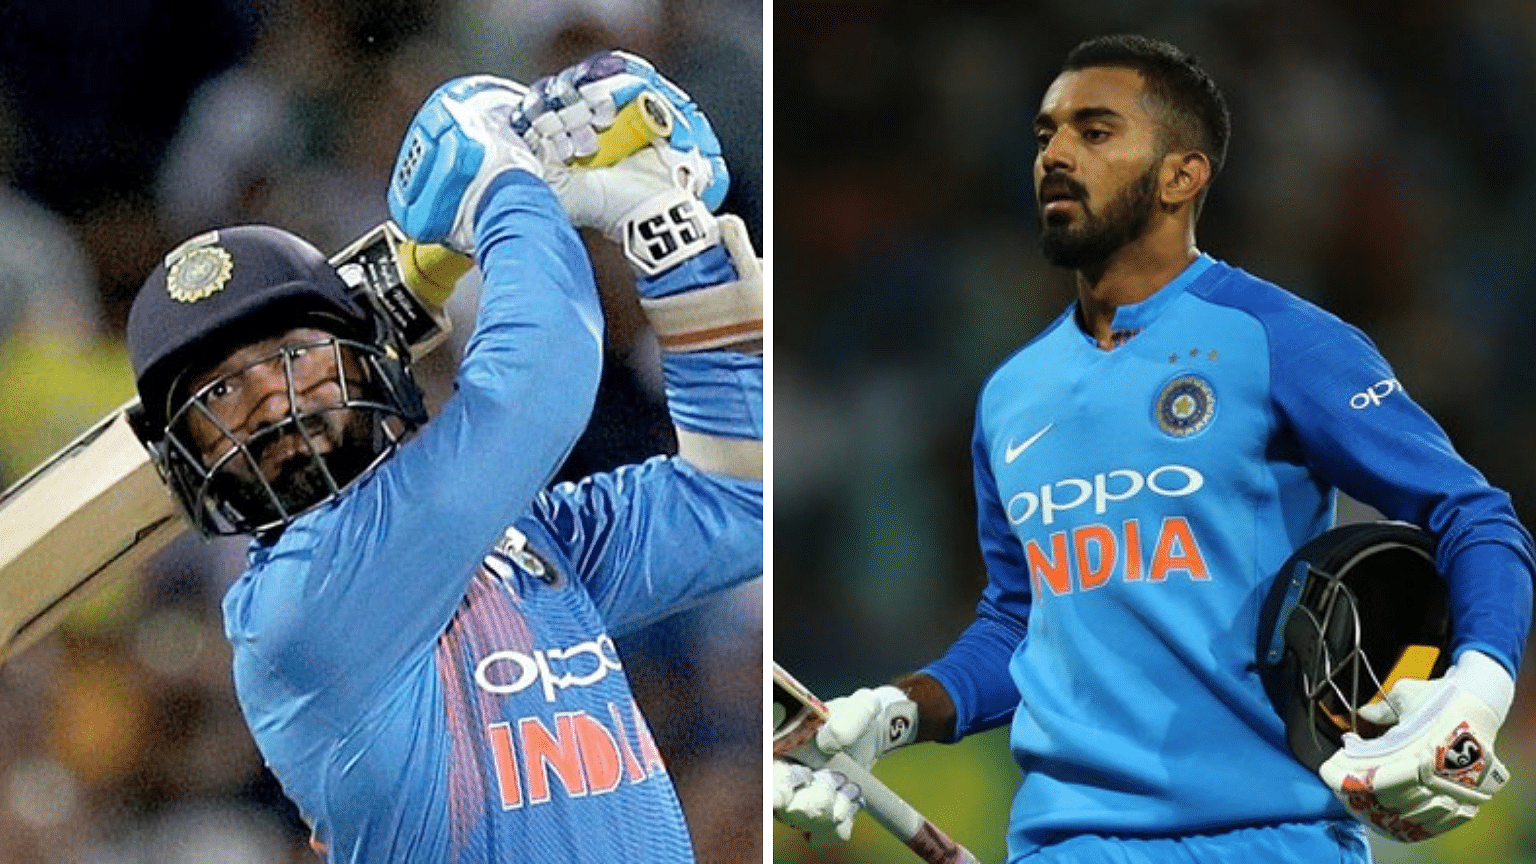 Dinesh Karthik (left) has been axed from the ODI squad, while KL Rahul returns in both formats for India’s upcoming limited overs series against Australia.